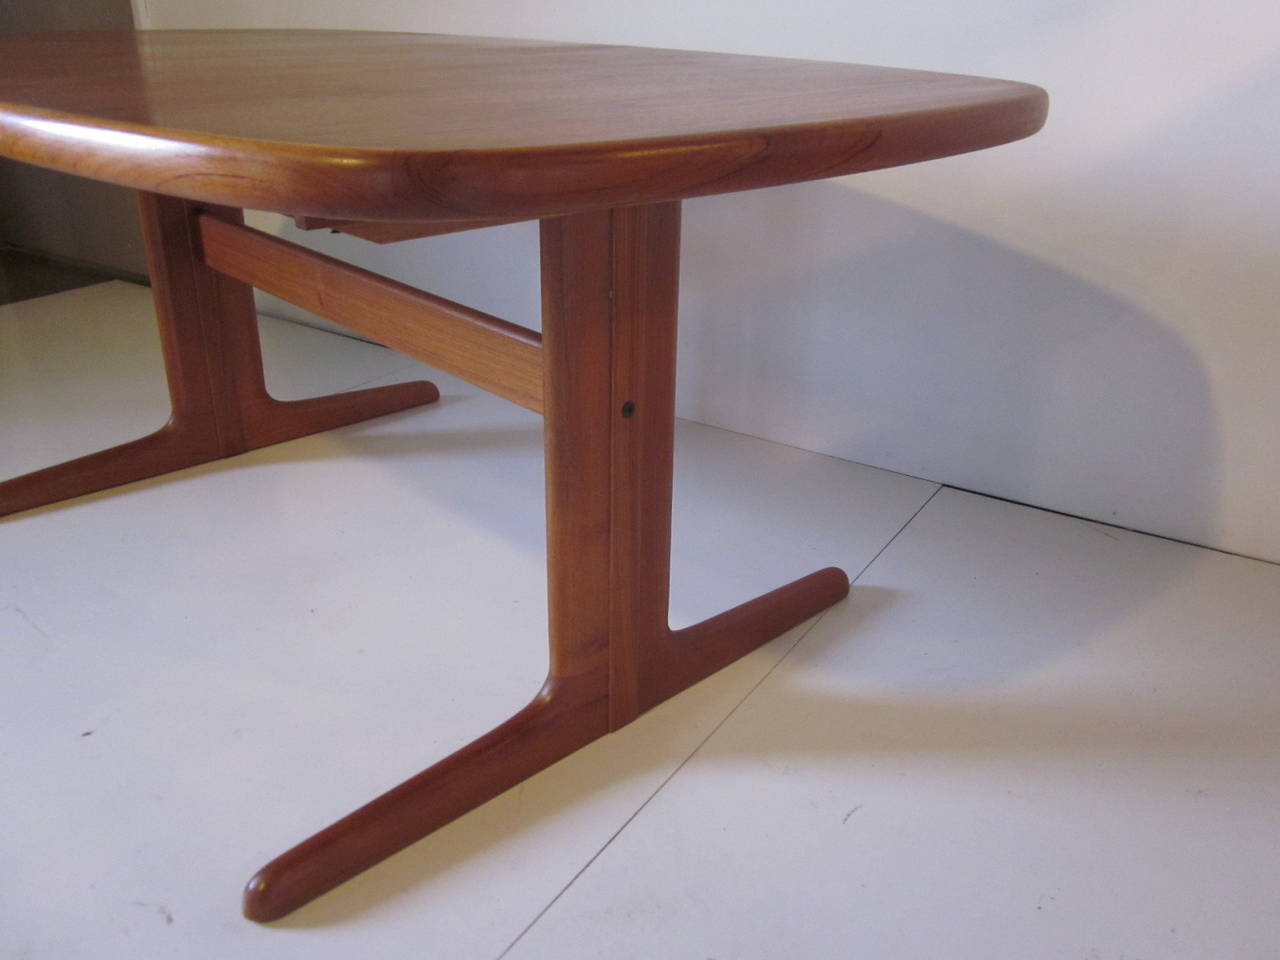 A teakwood dining table by Eric Buck with nice rounded edge. Two matching 19.63